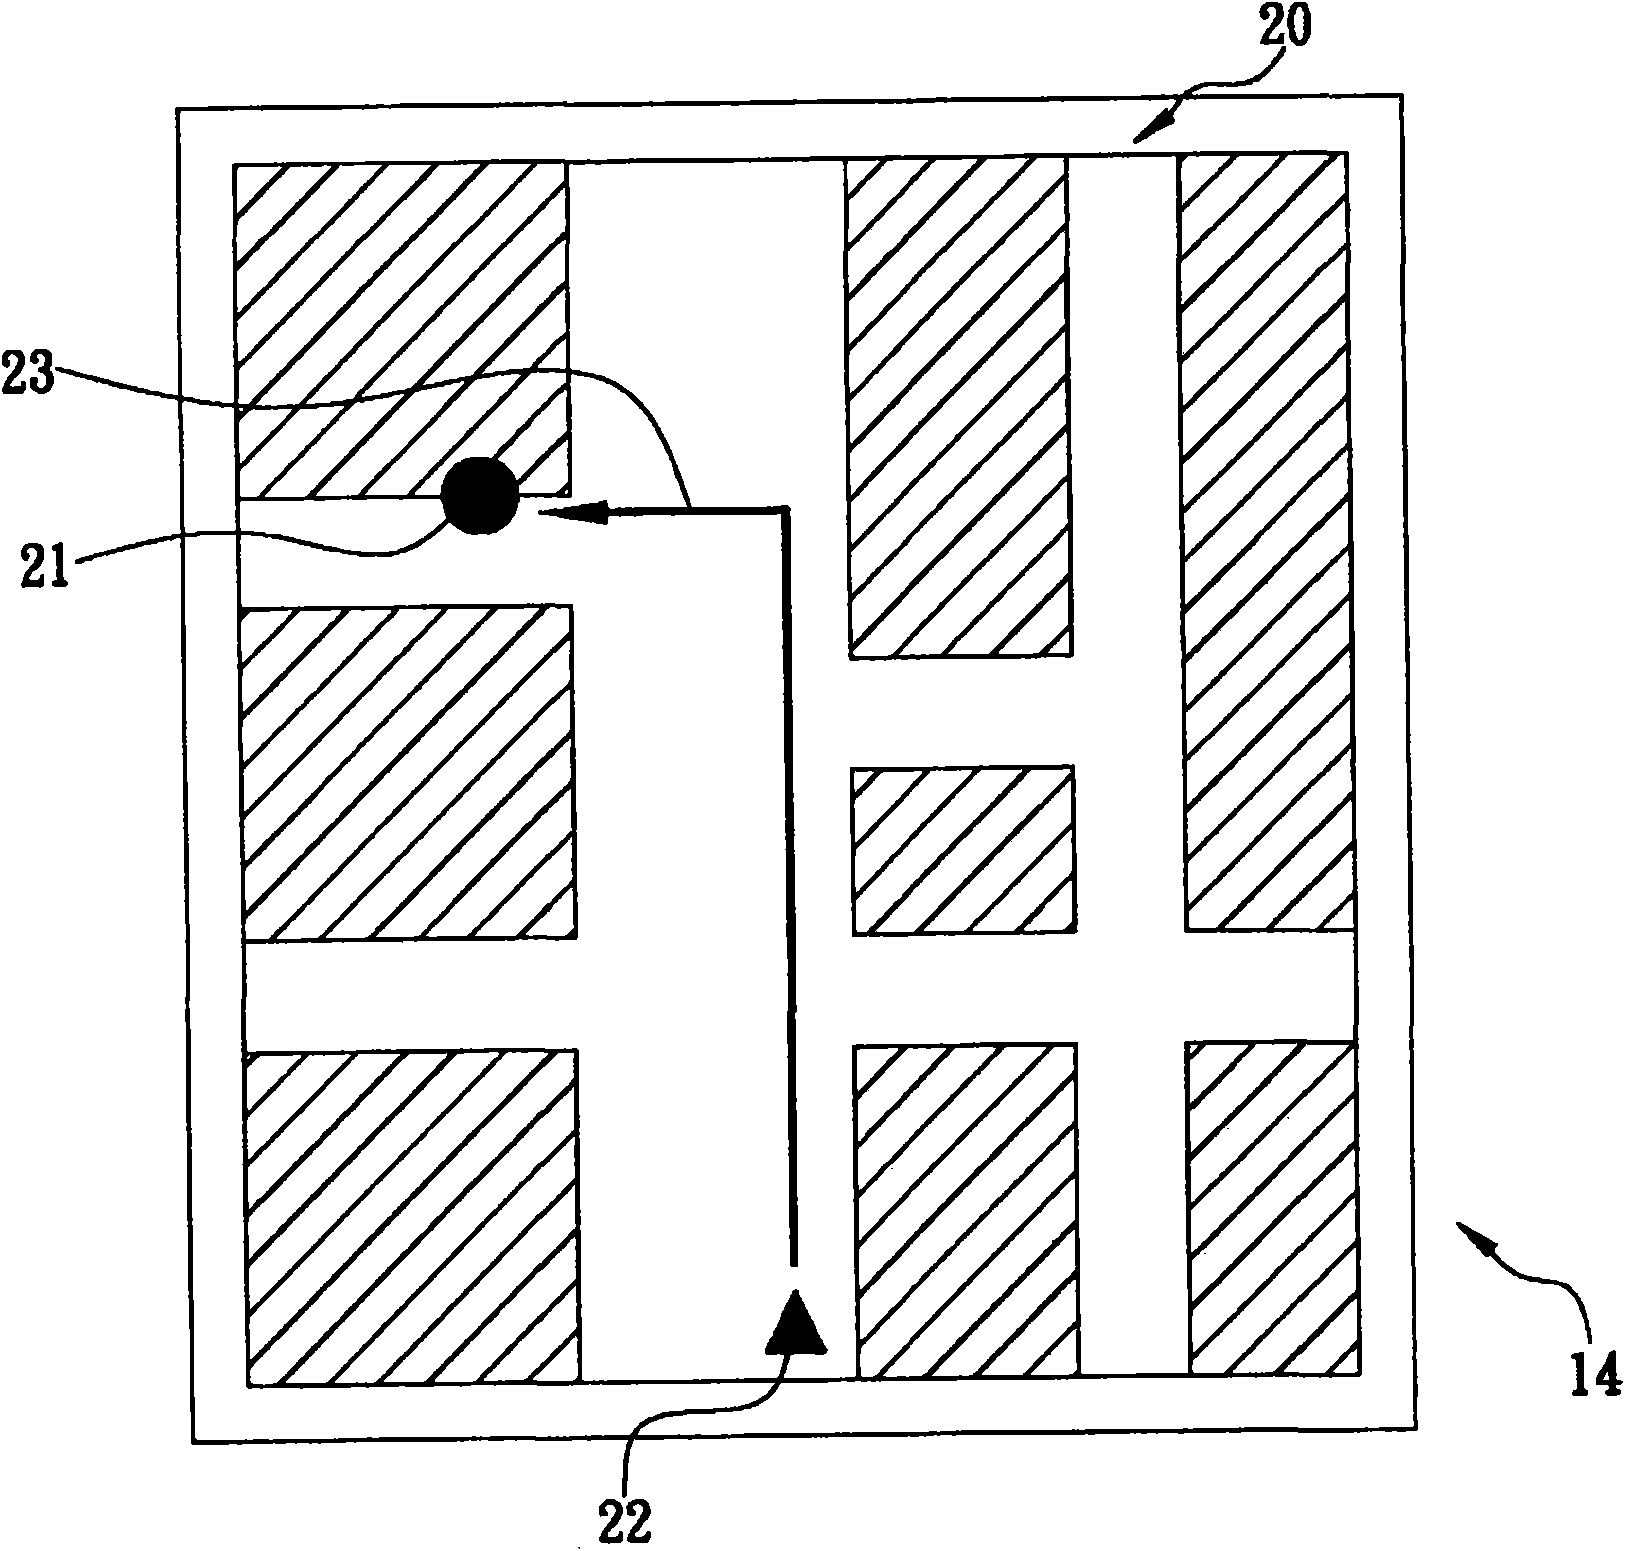 Positioning service method without electronic map